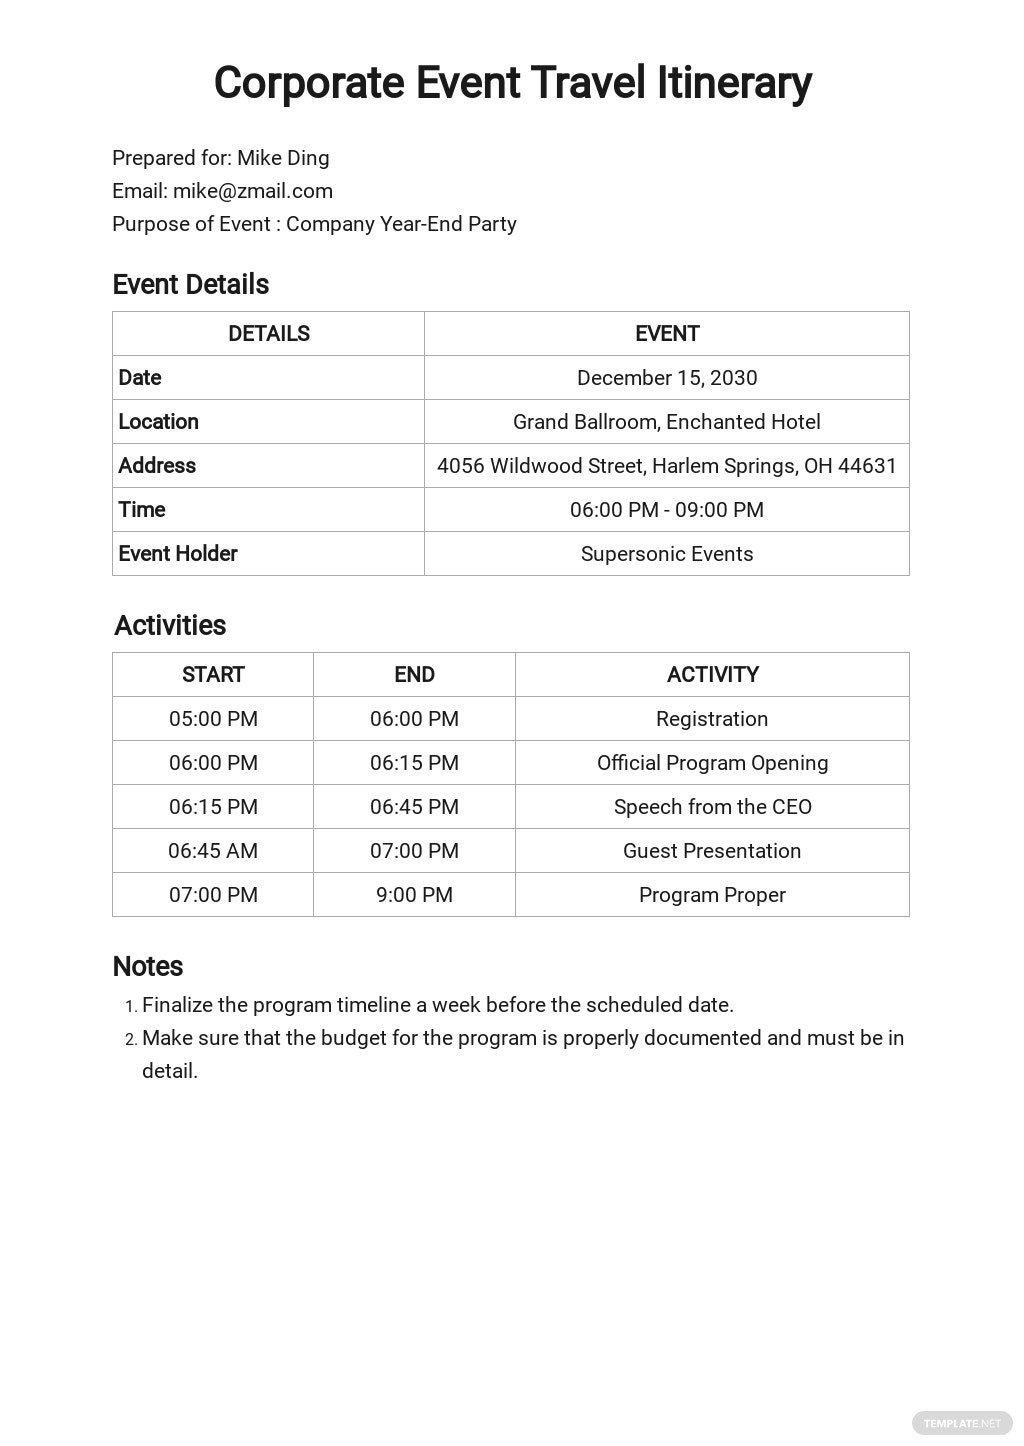 free-corporate-event-travel-itinerary-template